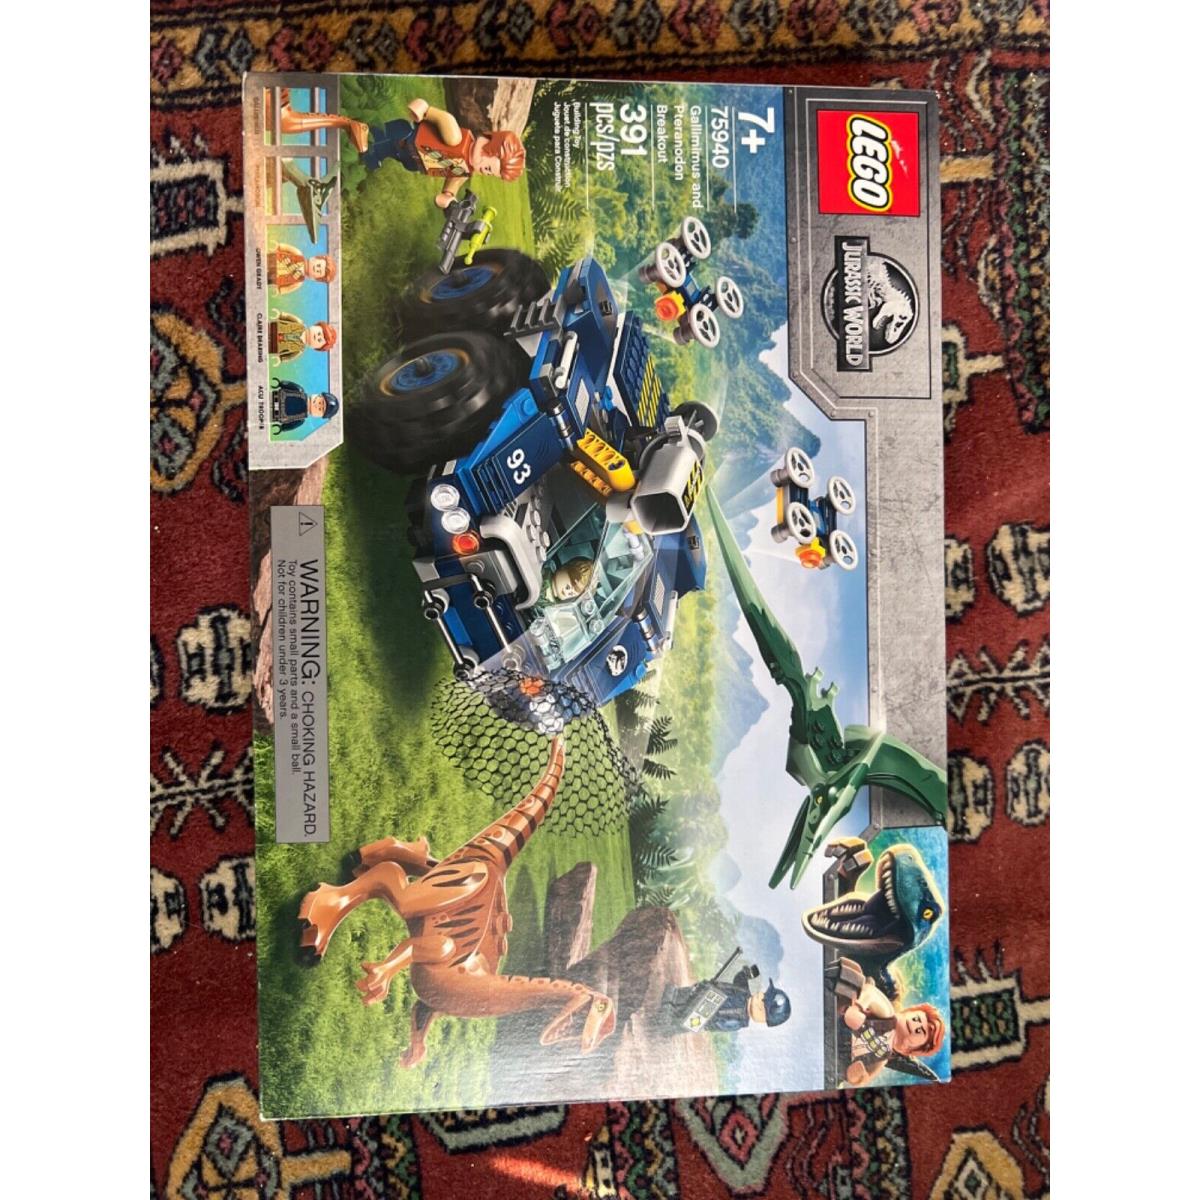 Lego Jurassic World 75940 - Gallimimus and Pteranodon Breakout Gift